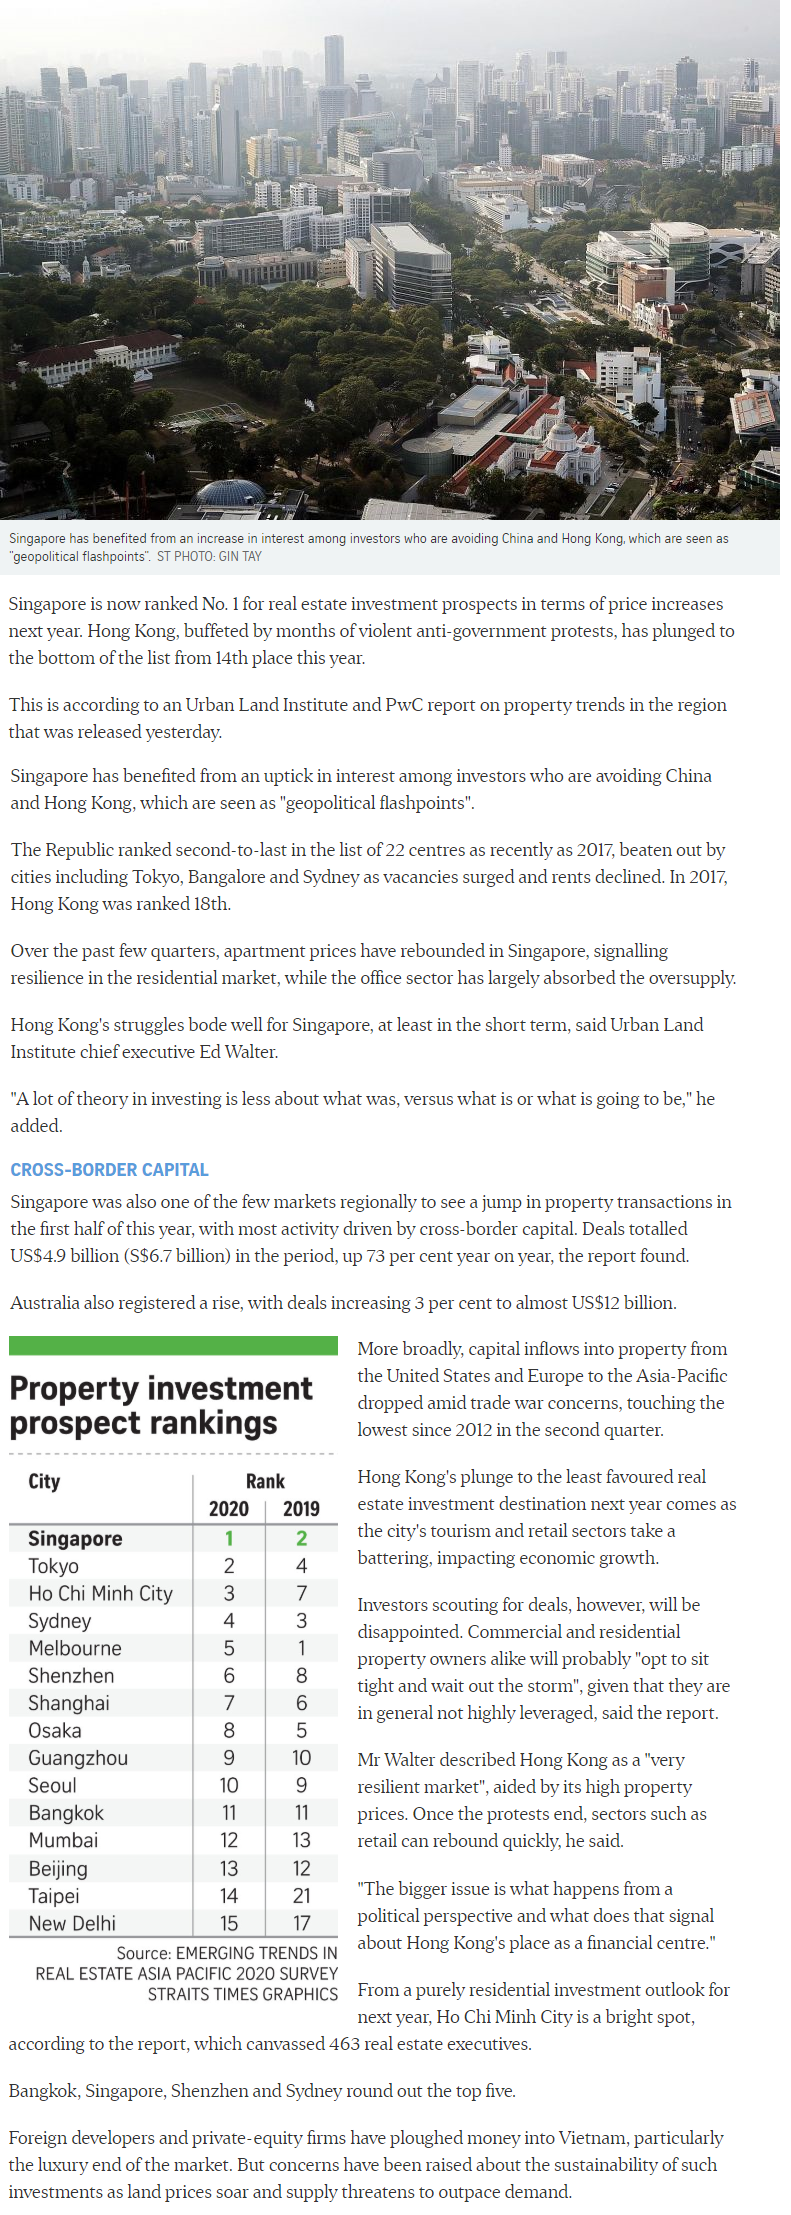 Canninghill Piers - Singapore Tops Region For Property Investment Prospects